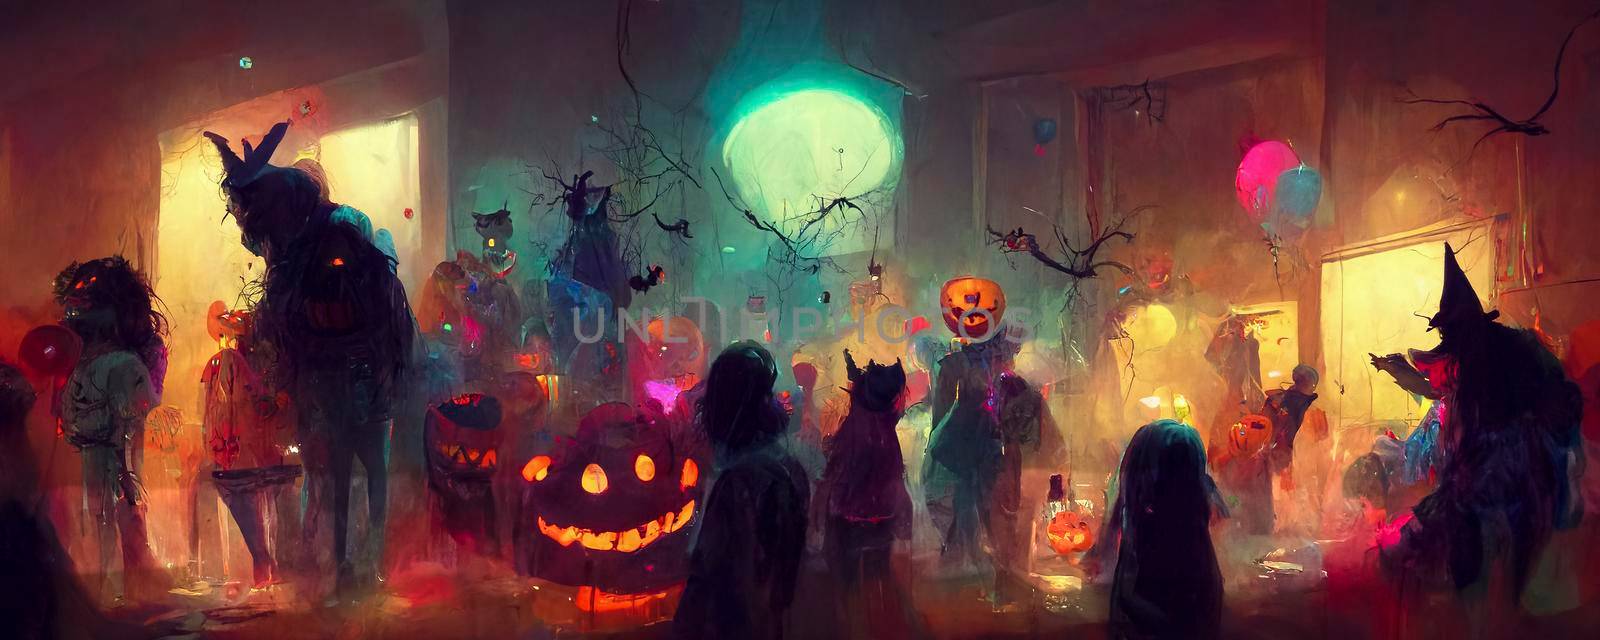 Halloween celebration party illustration, wallpaper, background, tickets and advertising. by jbruiz78